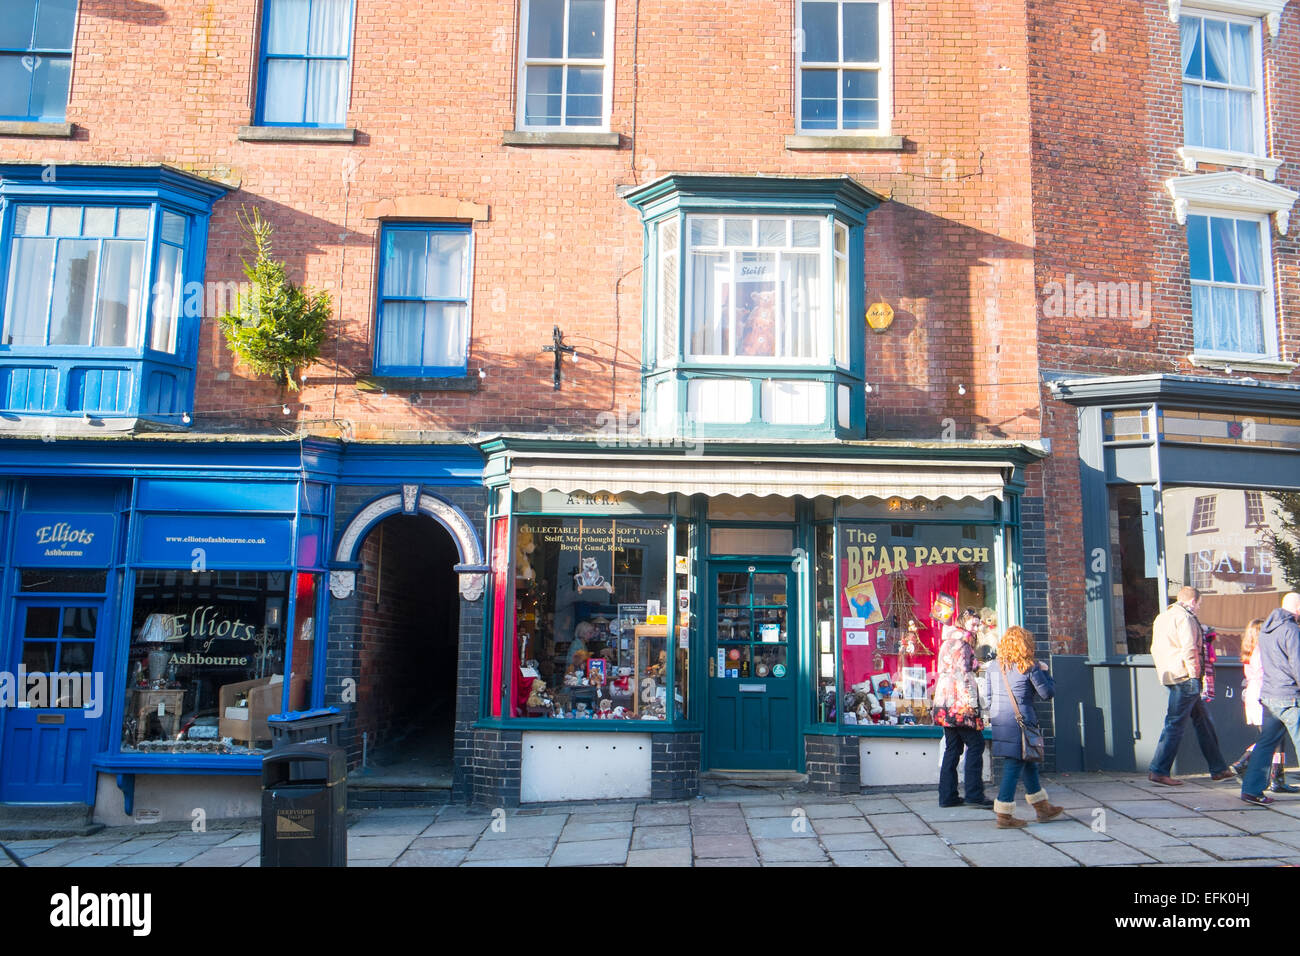 Ashbourne, a market town in the county of Derbyshire in England Stock Photo